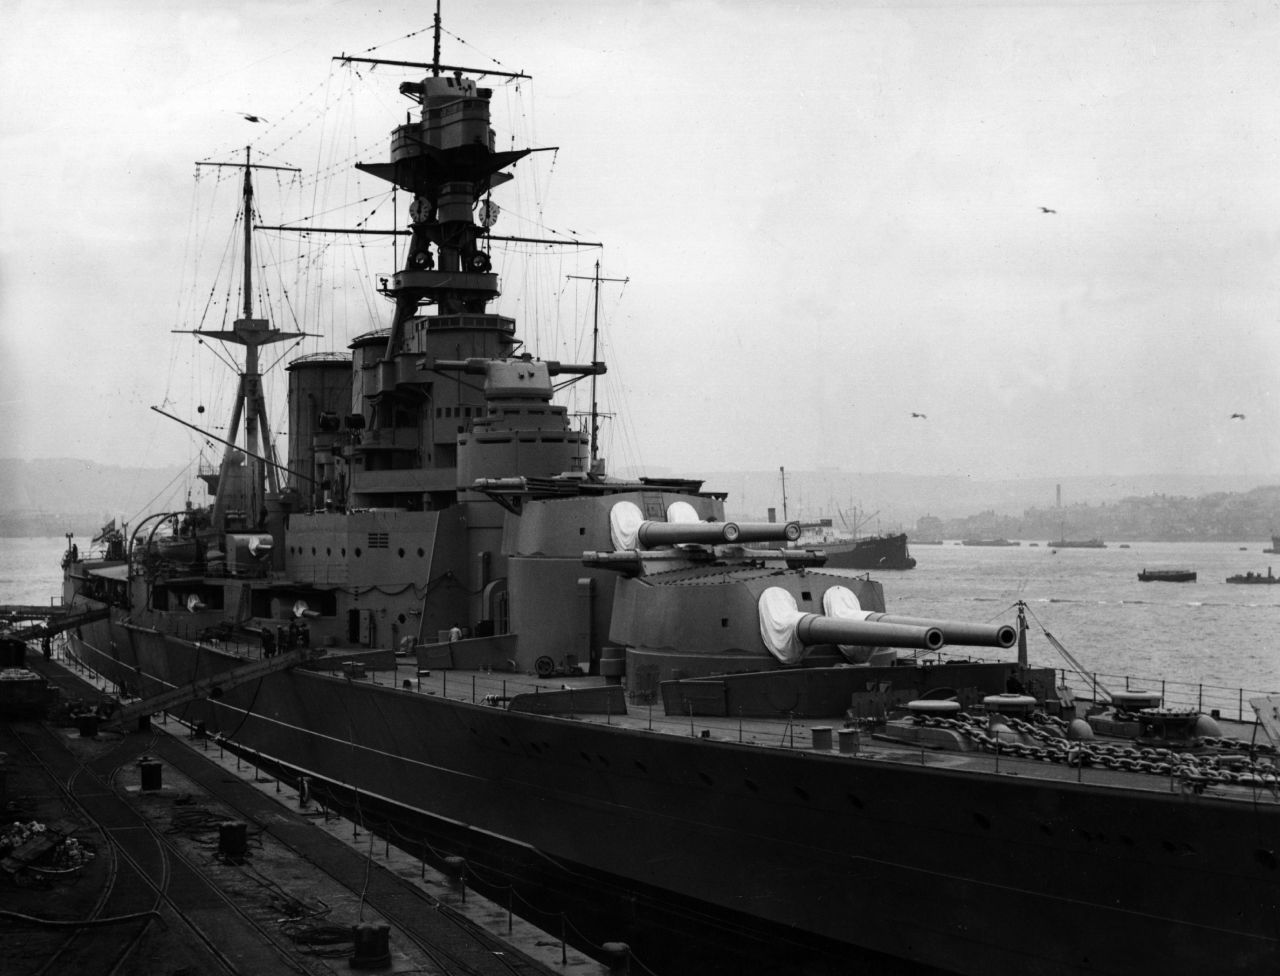 The battle cruiser HMS Hood during a dockyard refit. She served in World War II before she was sunk by the Bismarck on May 24, 1941. The shipwreck was located in 2001 -- the 60th anniversary of the battle between the Hood and Bismarck. 